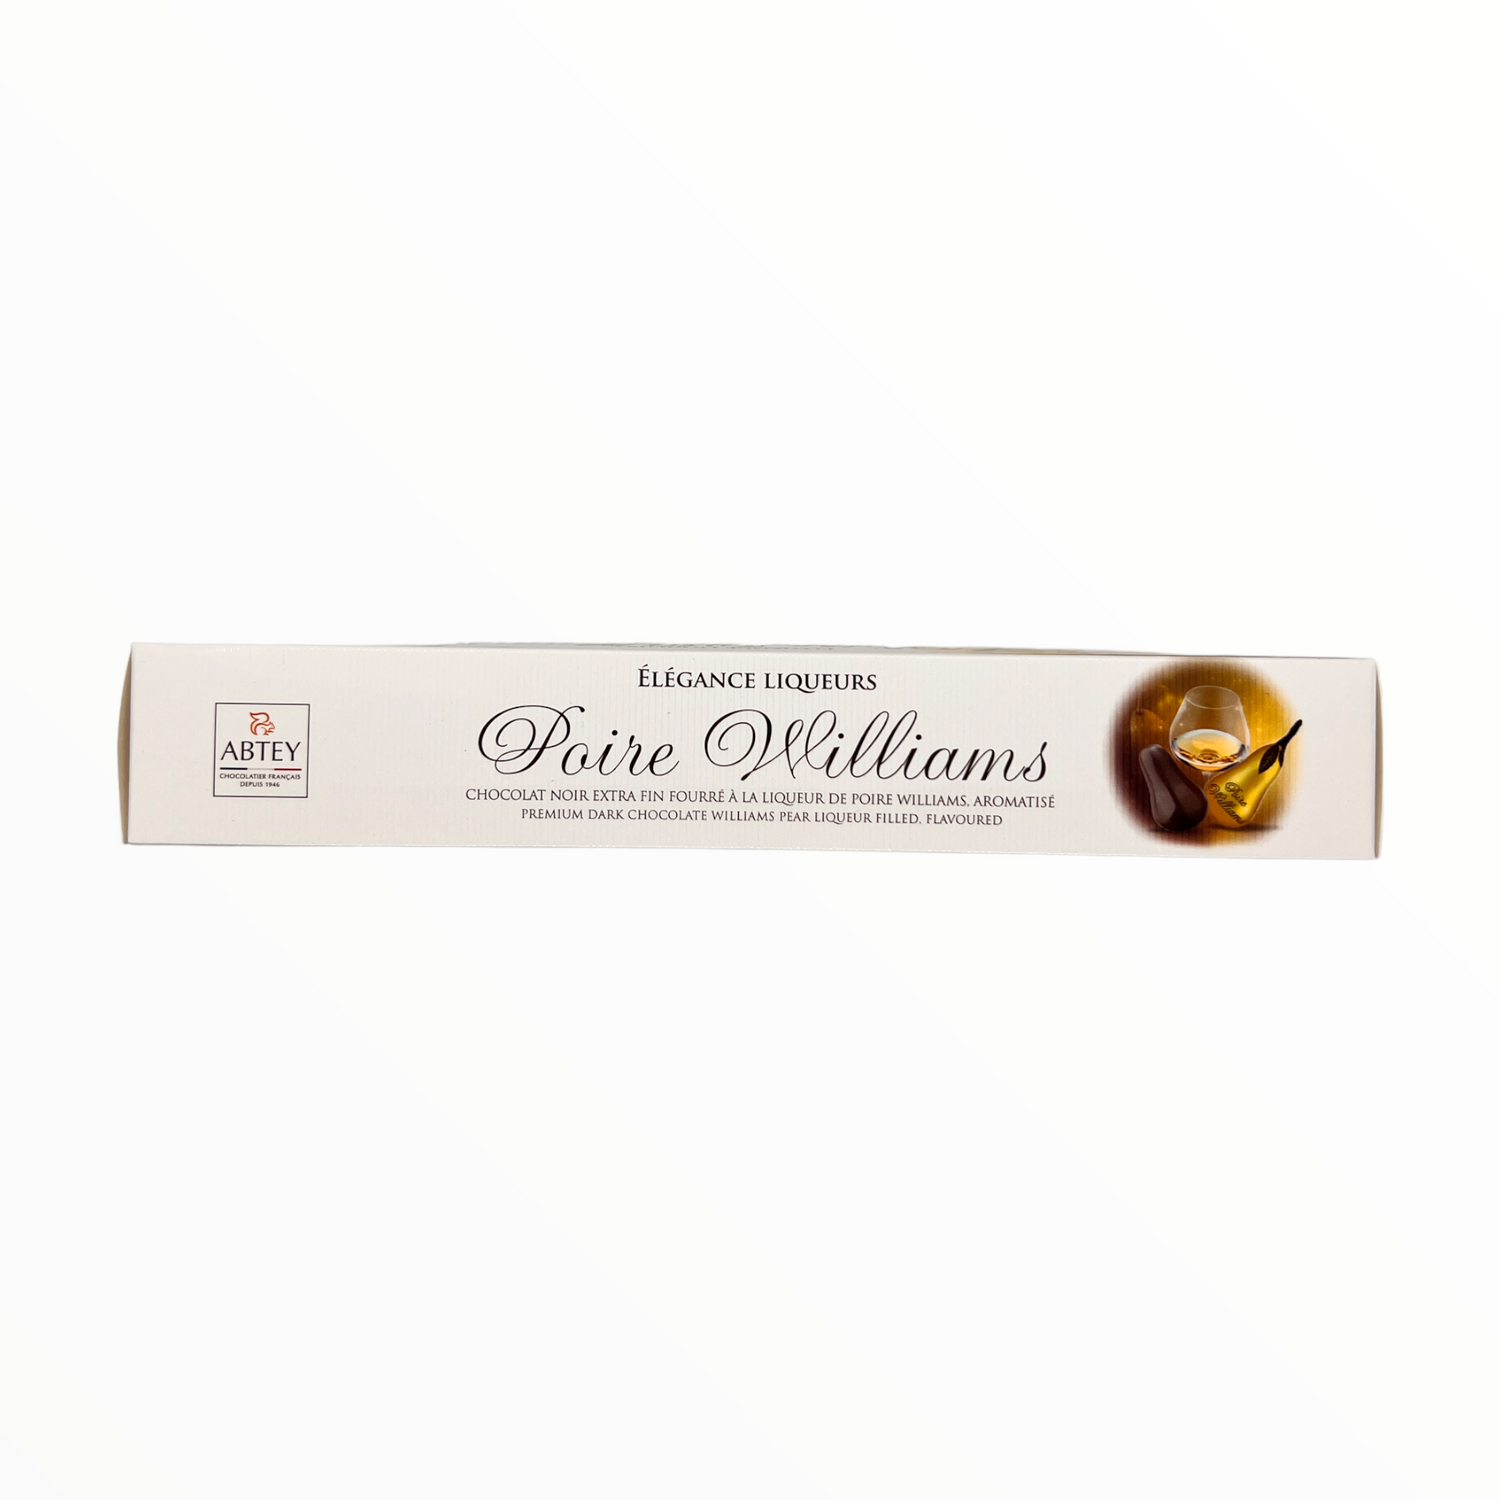 Buy the best dark chocolates with liquor from France online in the US.  Abtey Poire Williams Liquor Chocolates